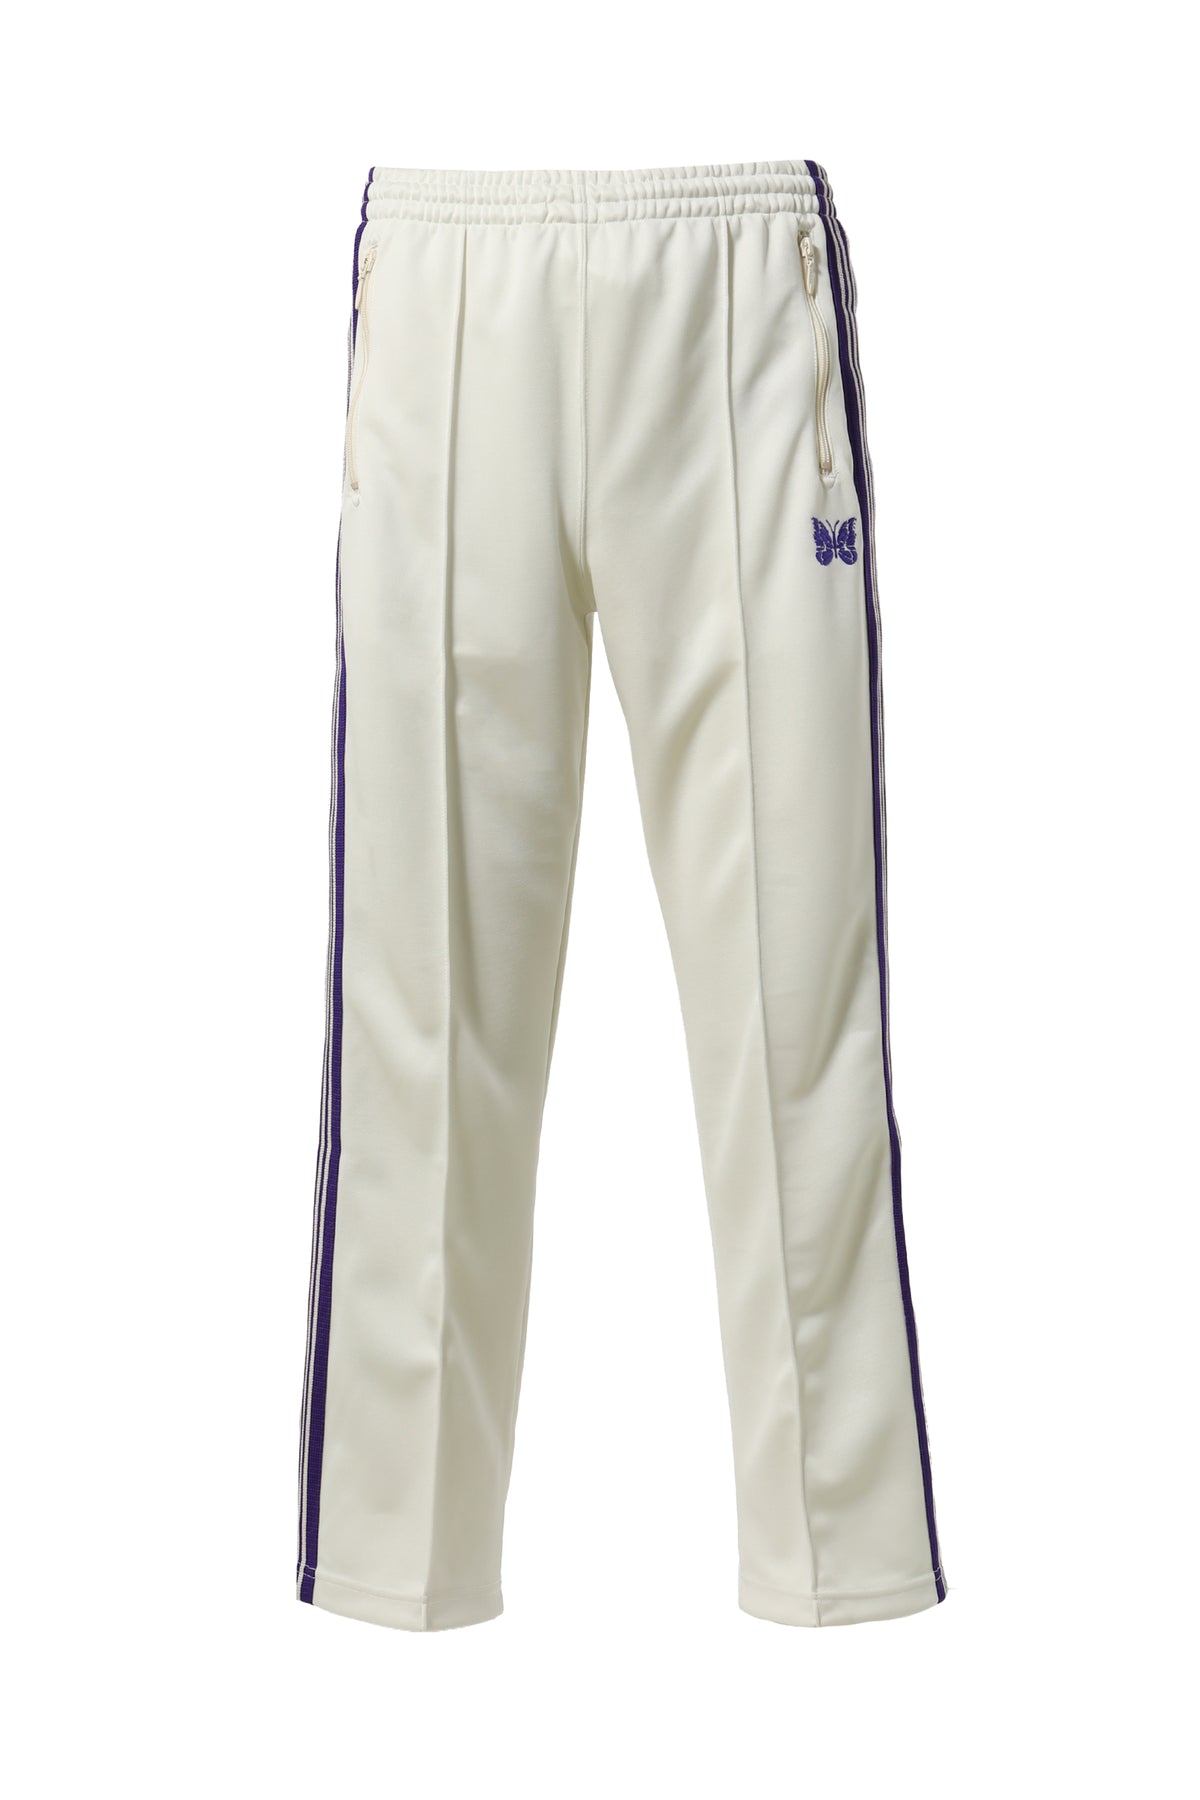 TRACK PANT - POLY SMOOTH / ICE WHT